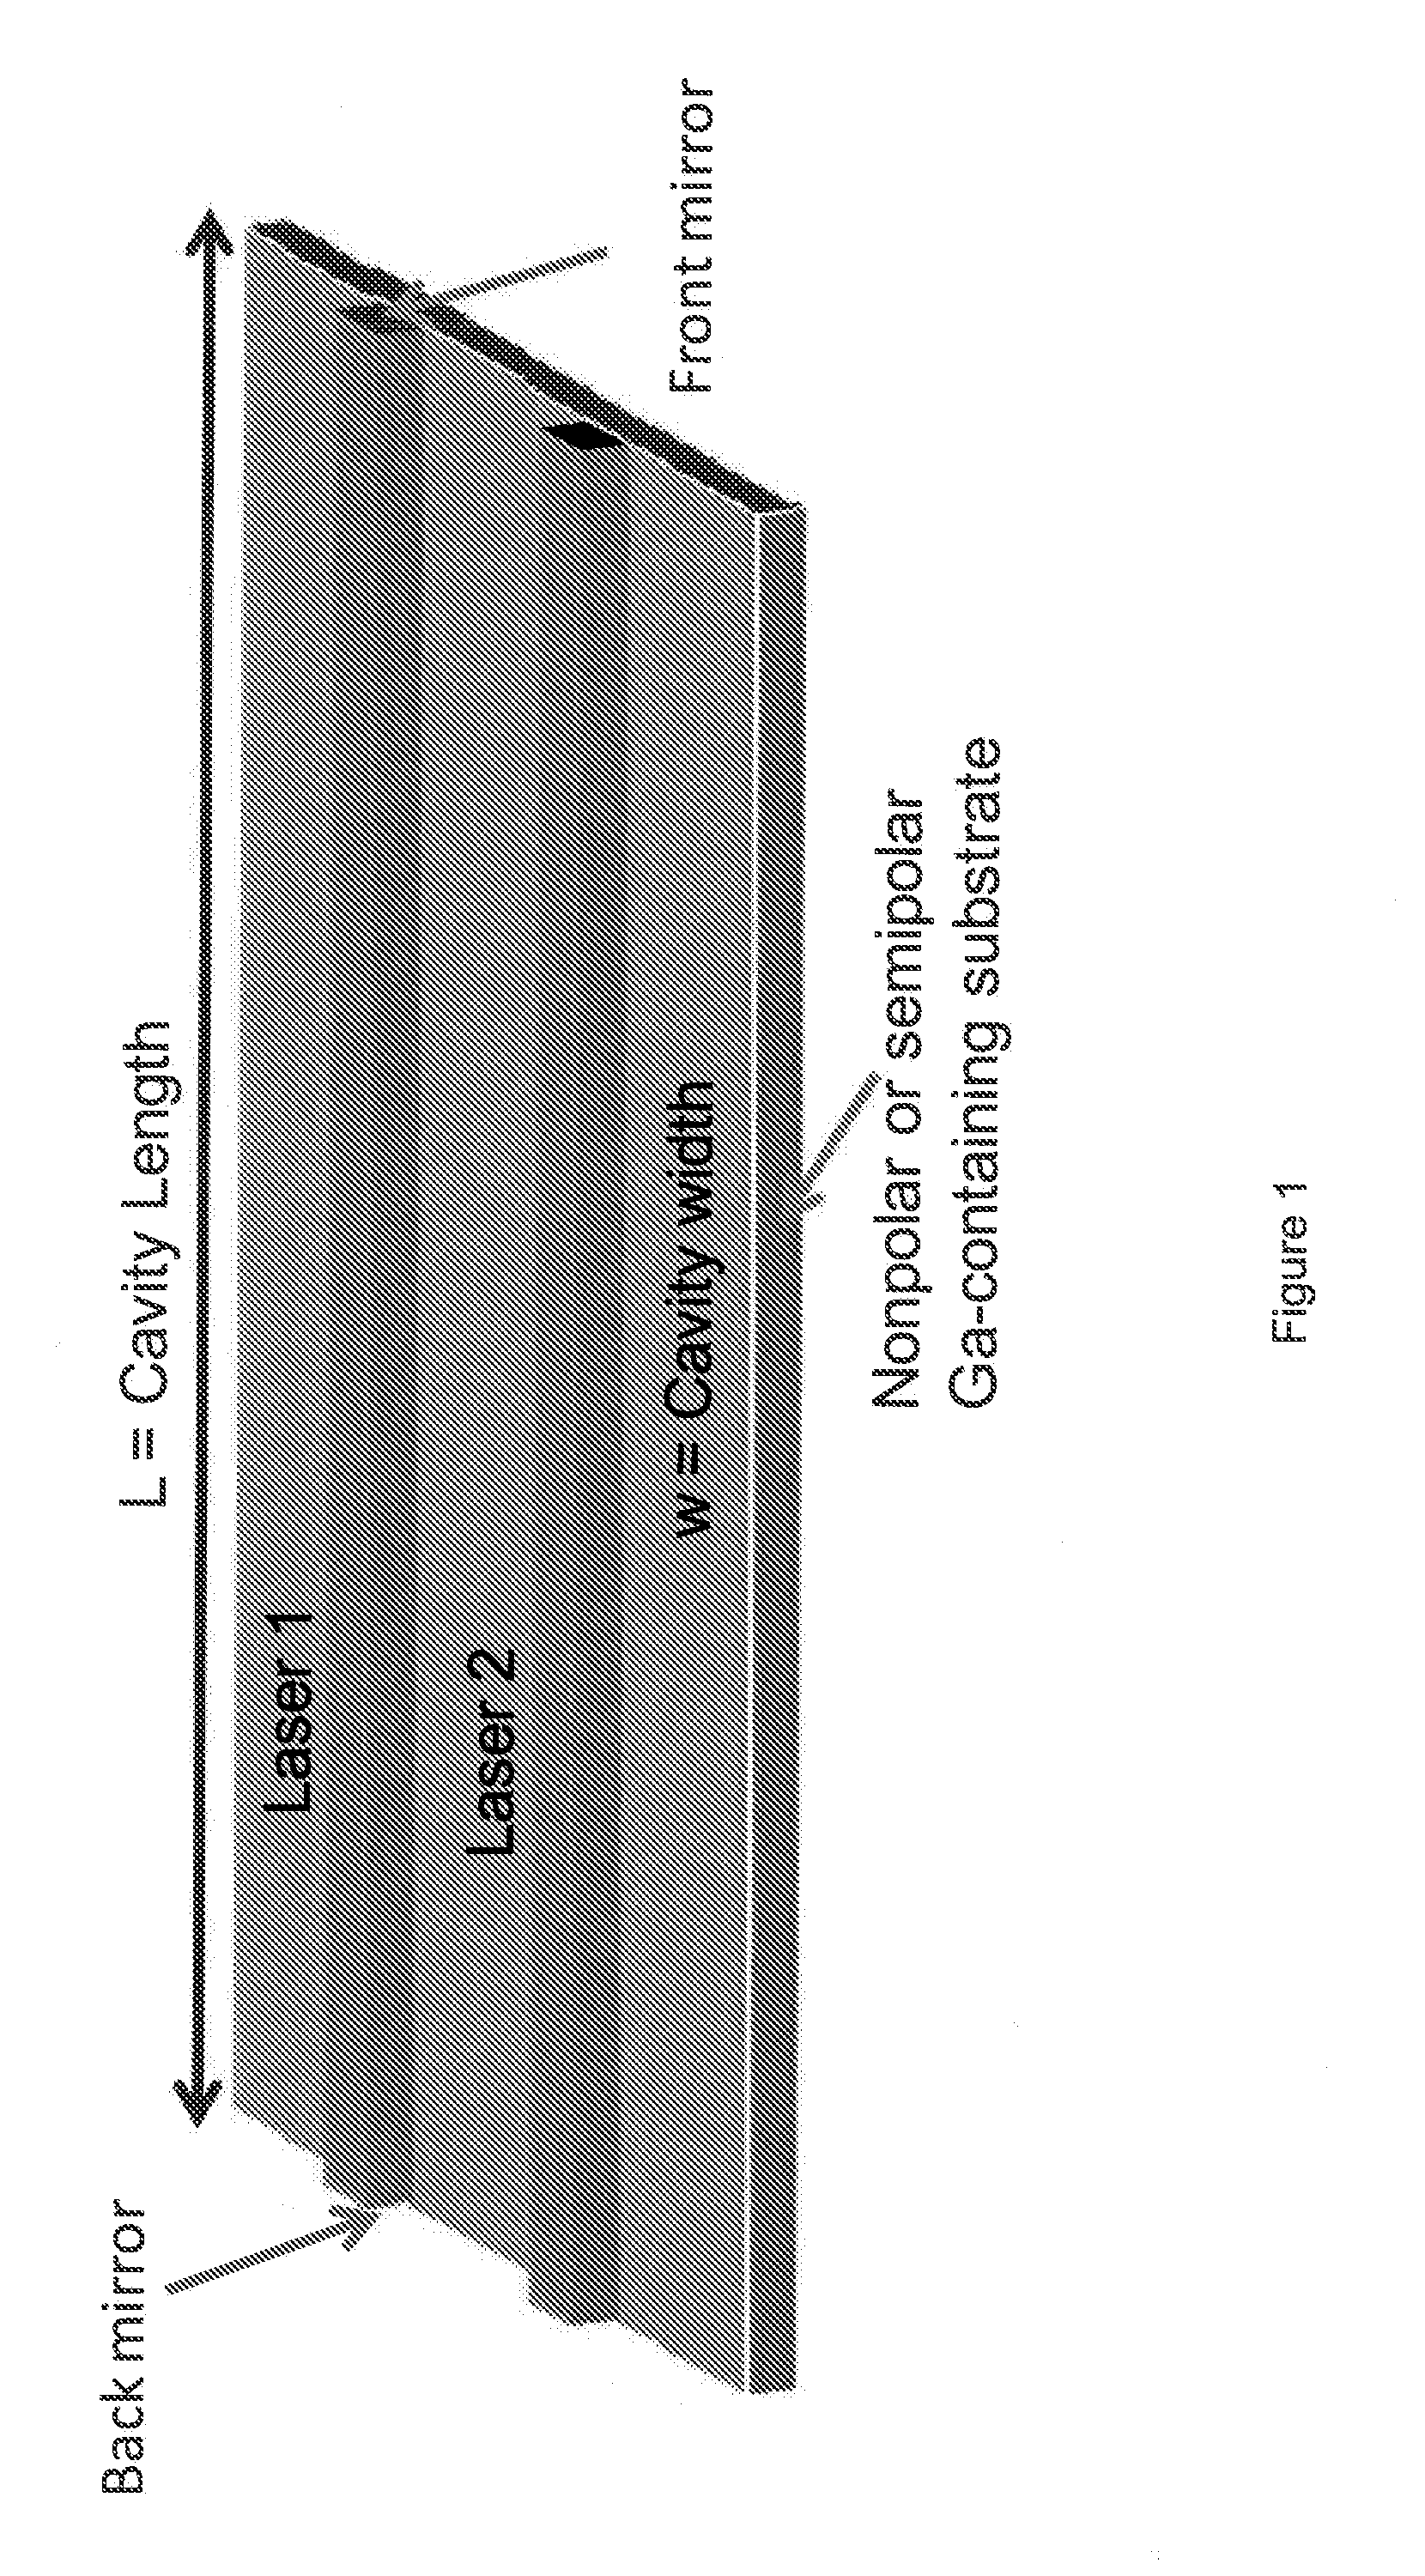 System and Method of Multi-Wavelength Laser Apparatus